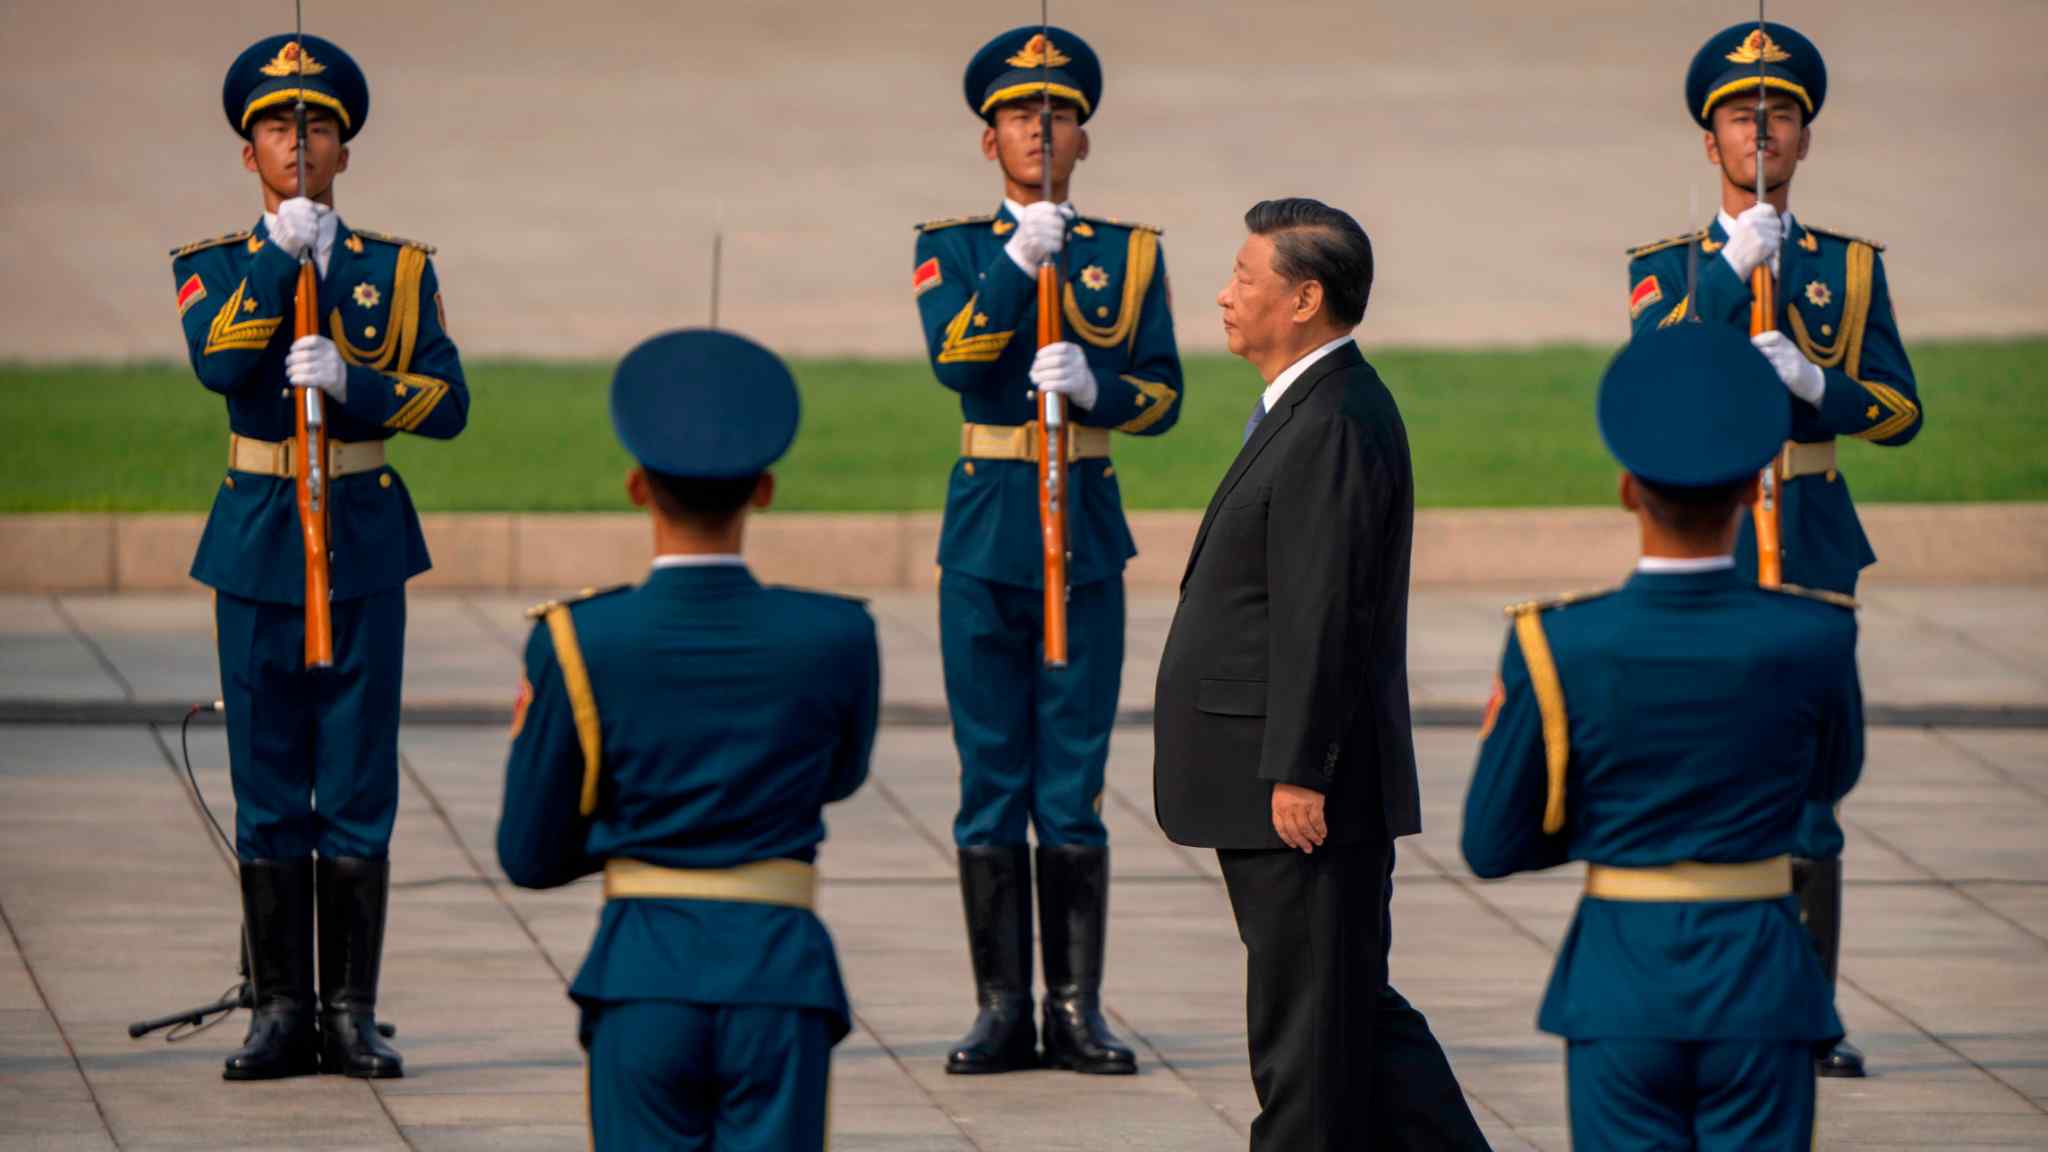 Xi cracks down on disloyalty ahead of Communist party congress